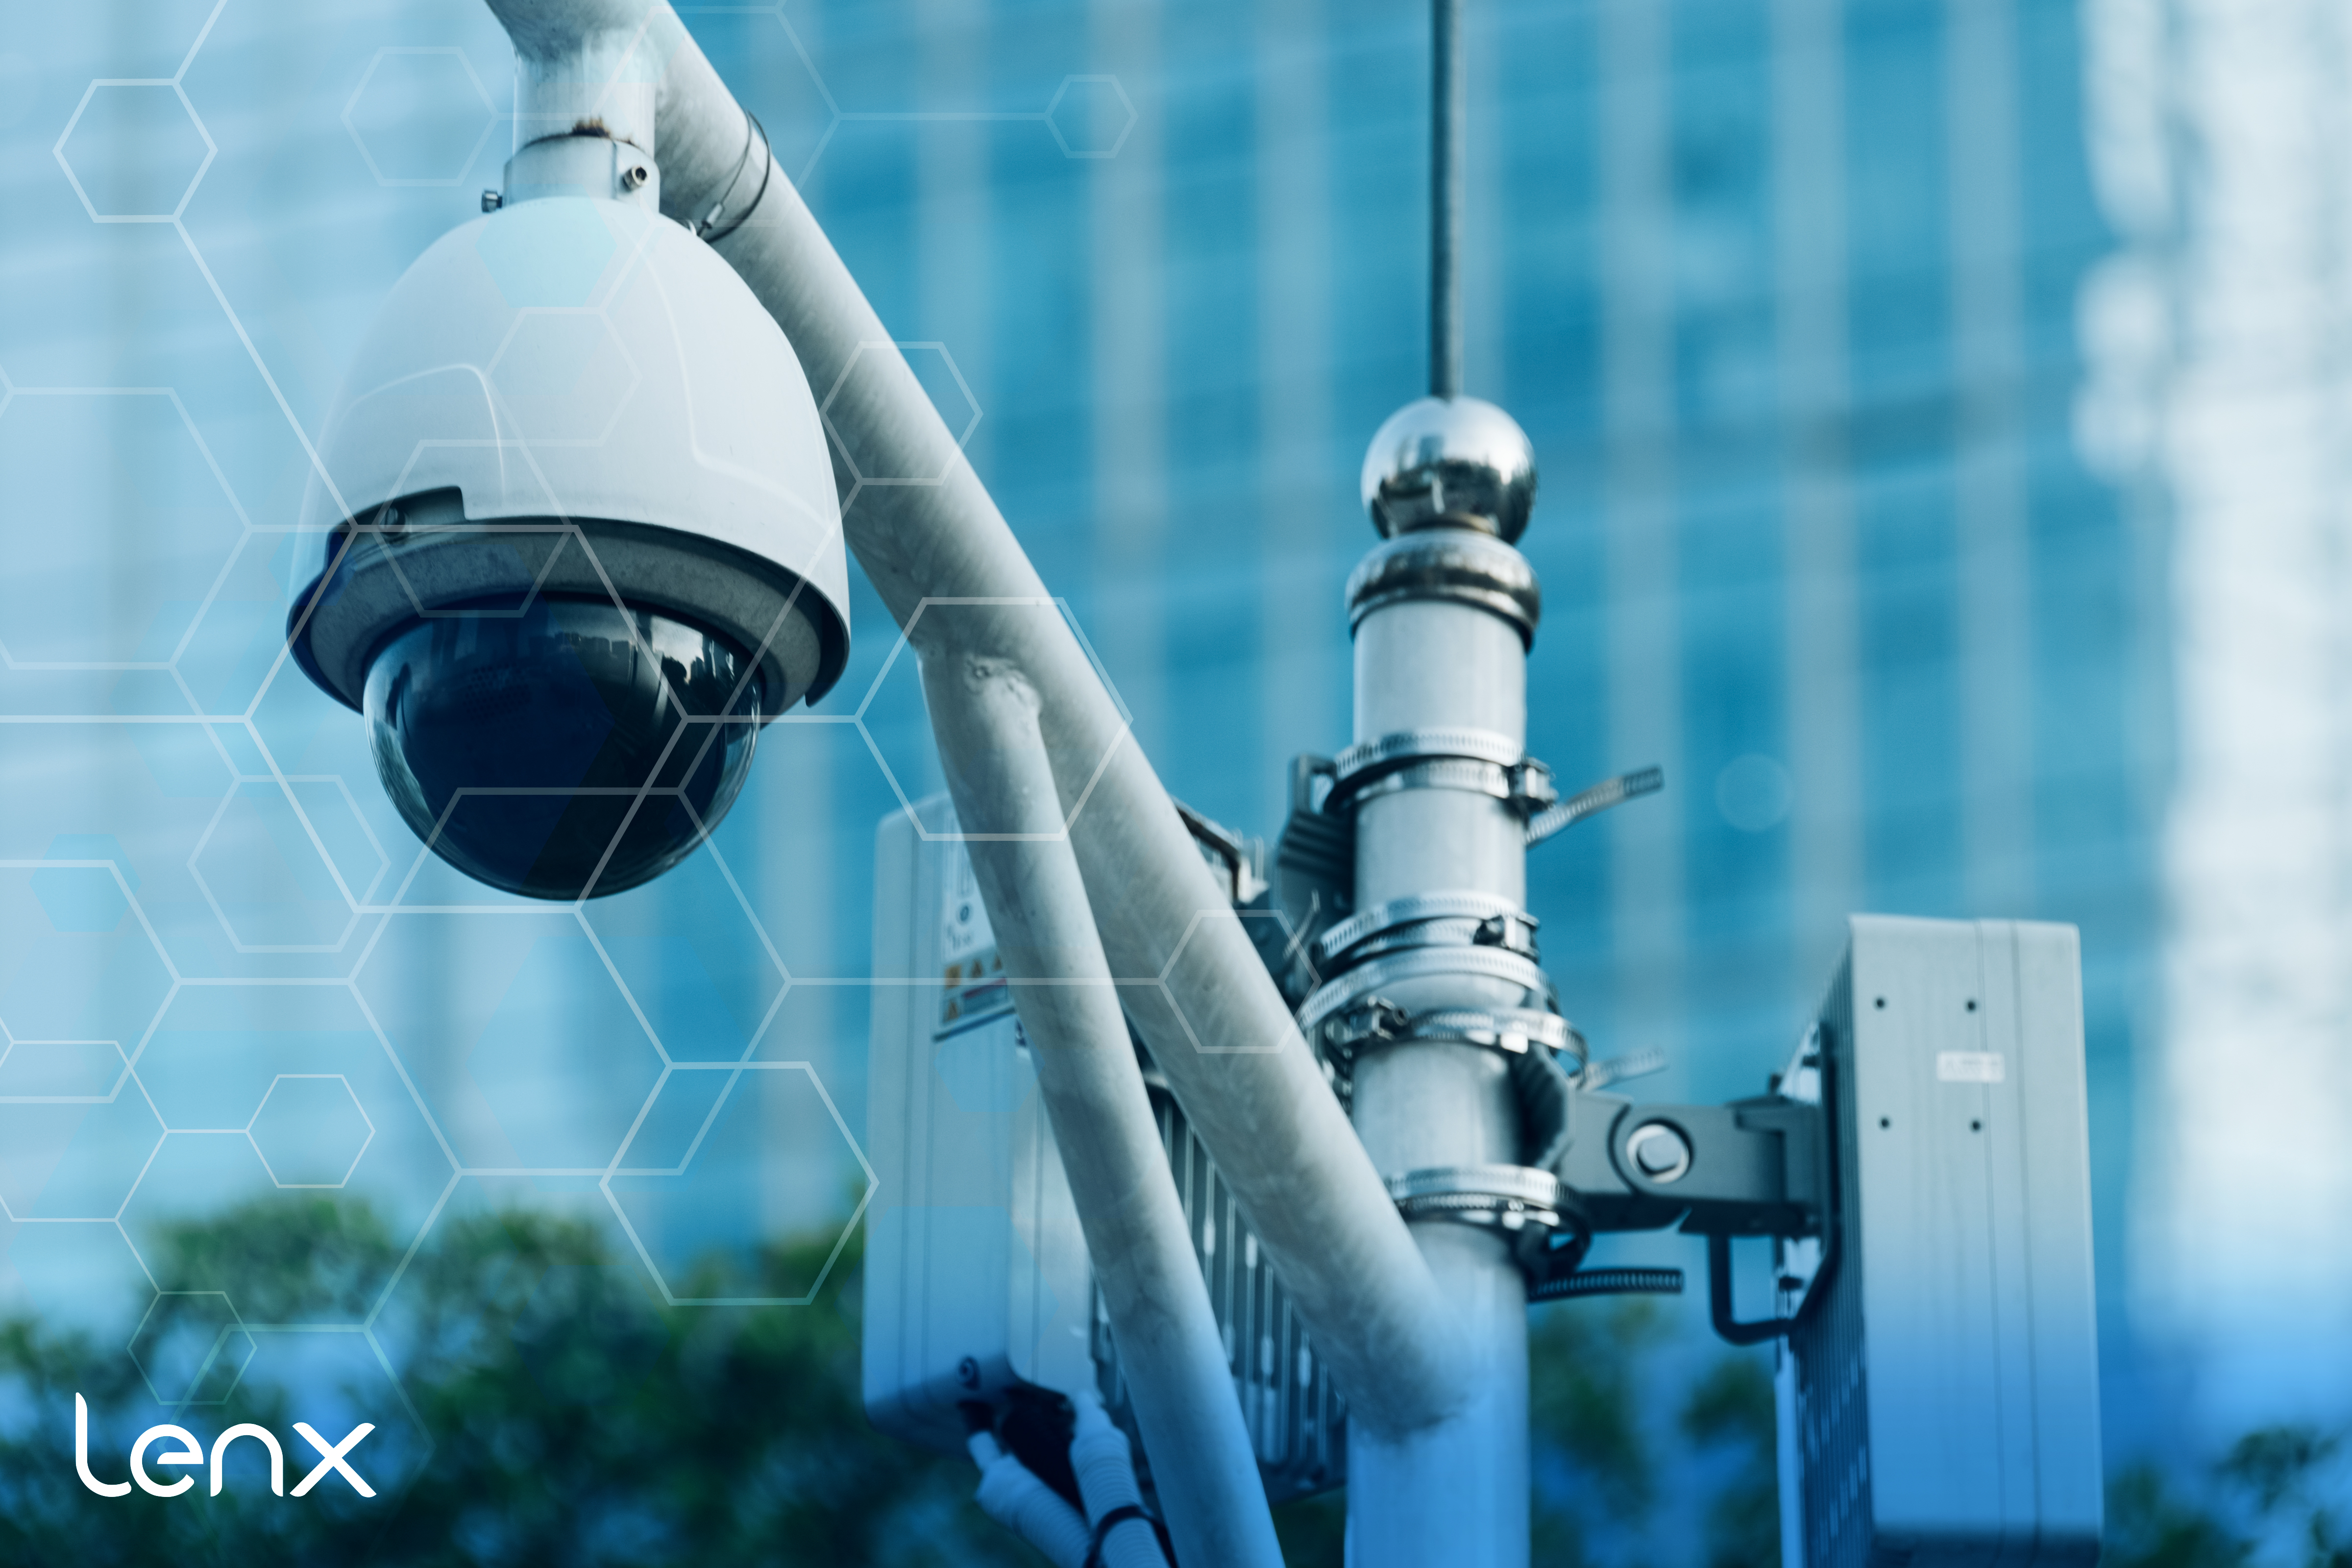 Raising Awareness Of AI Security And Active Shooter Detection Systems